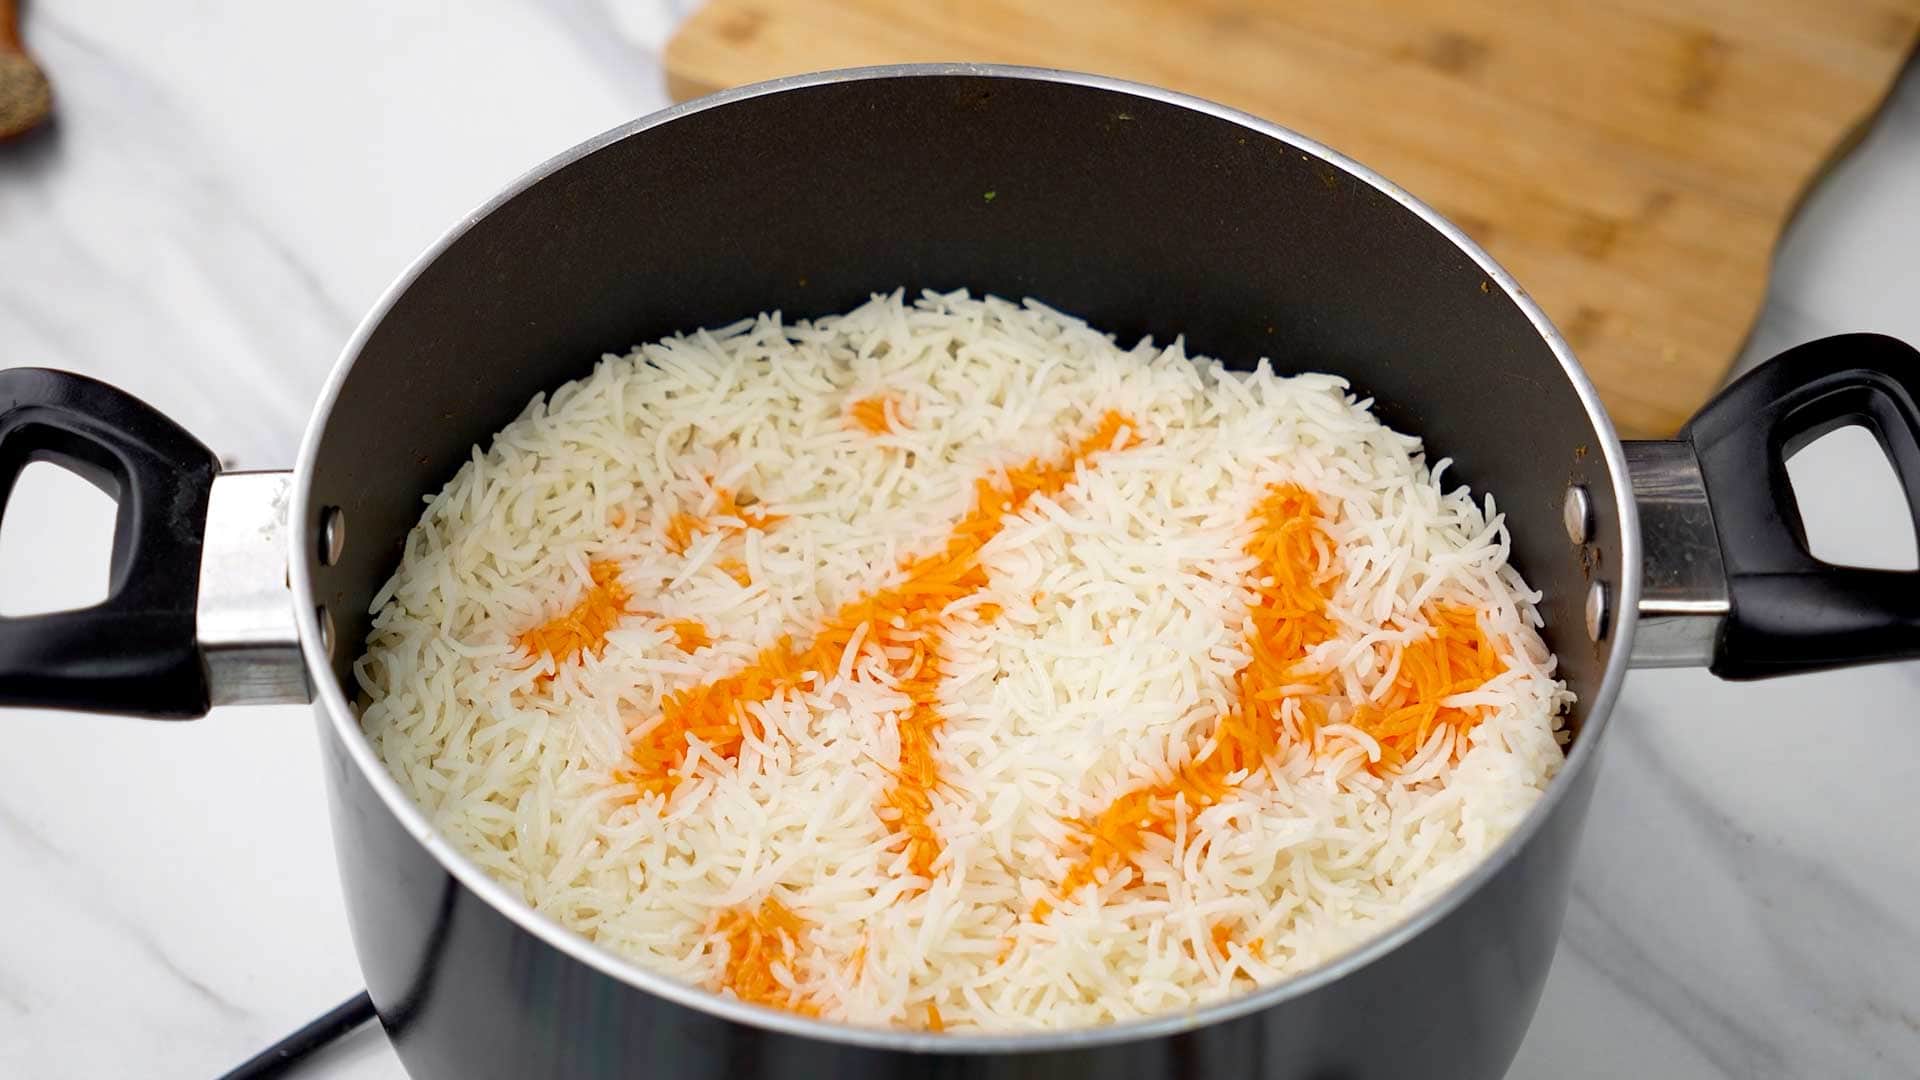 Saffron milk on the top of fluffy rice